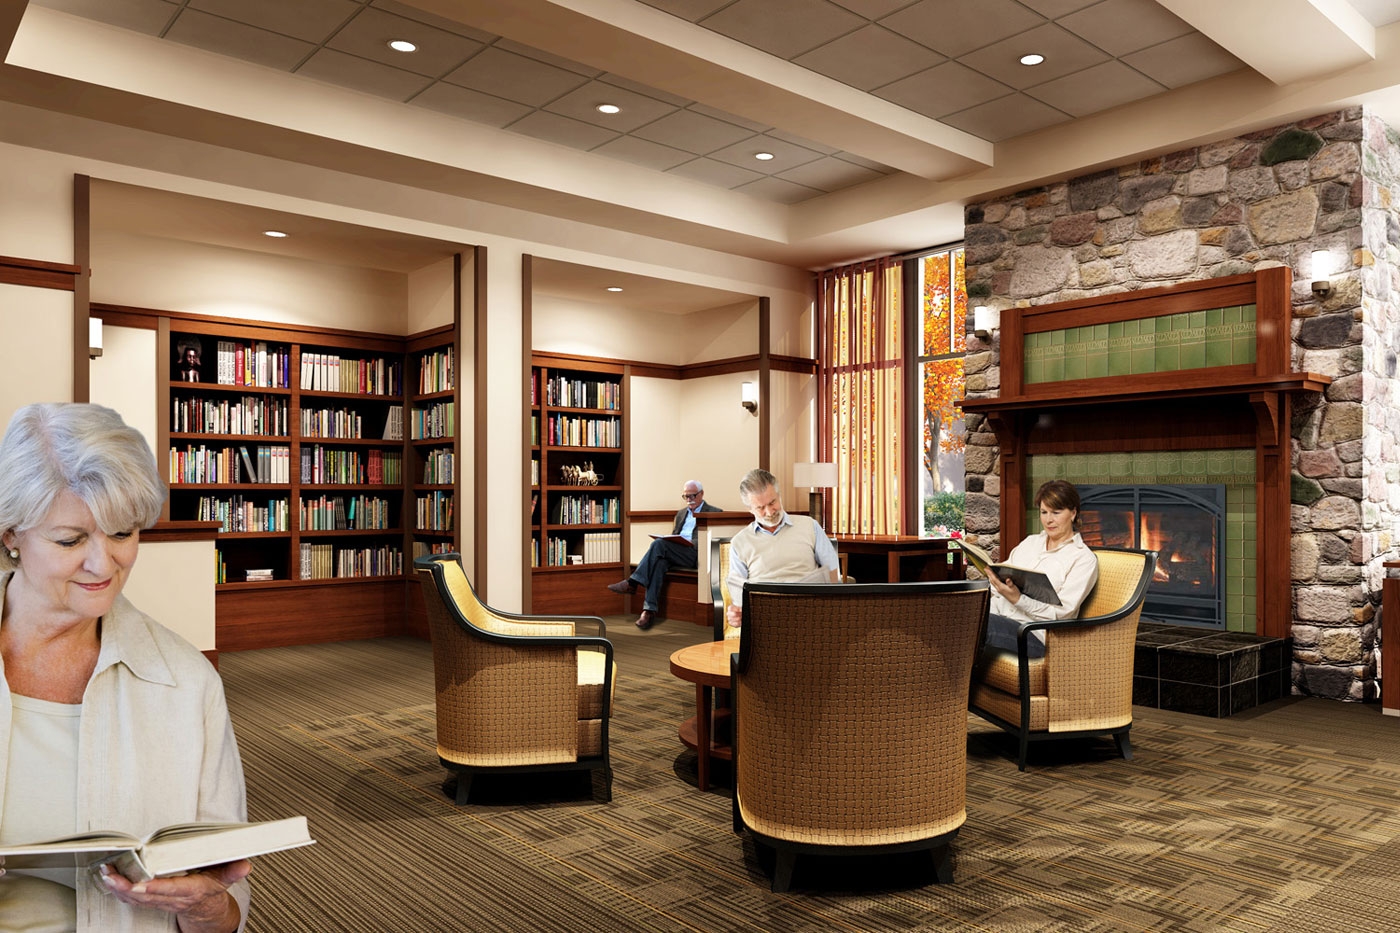 WDC designers created this spacious library in an independent living/assisted living community